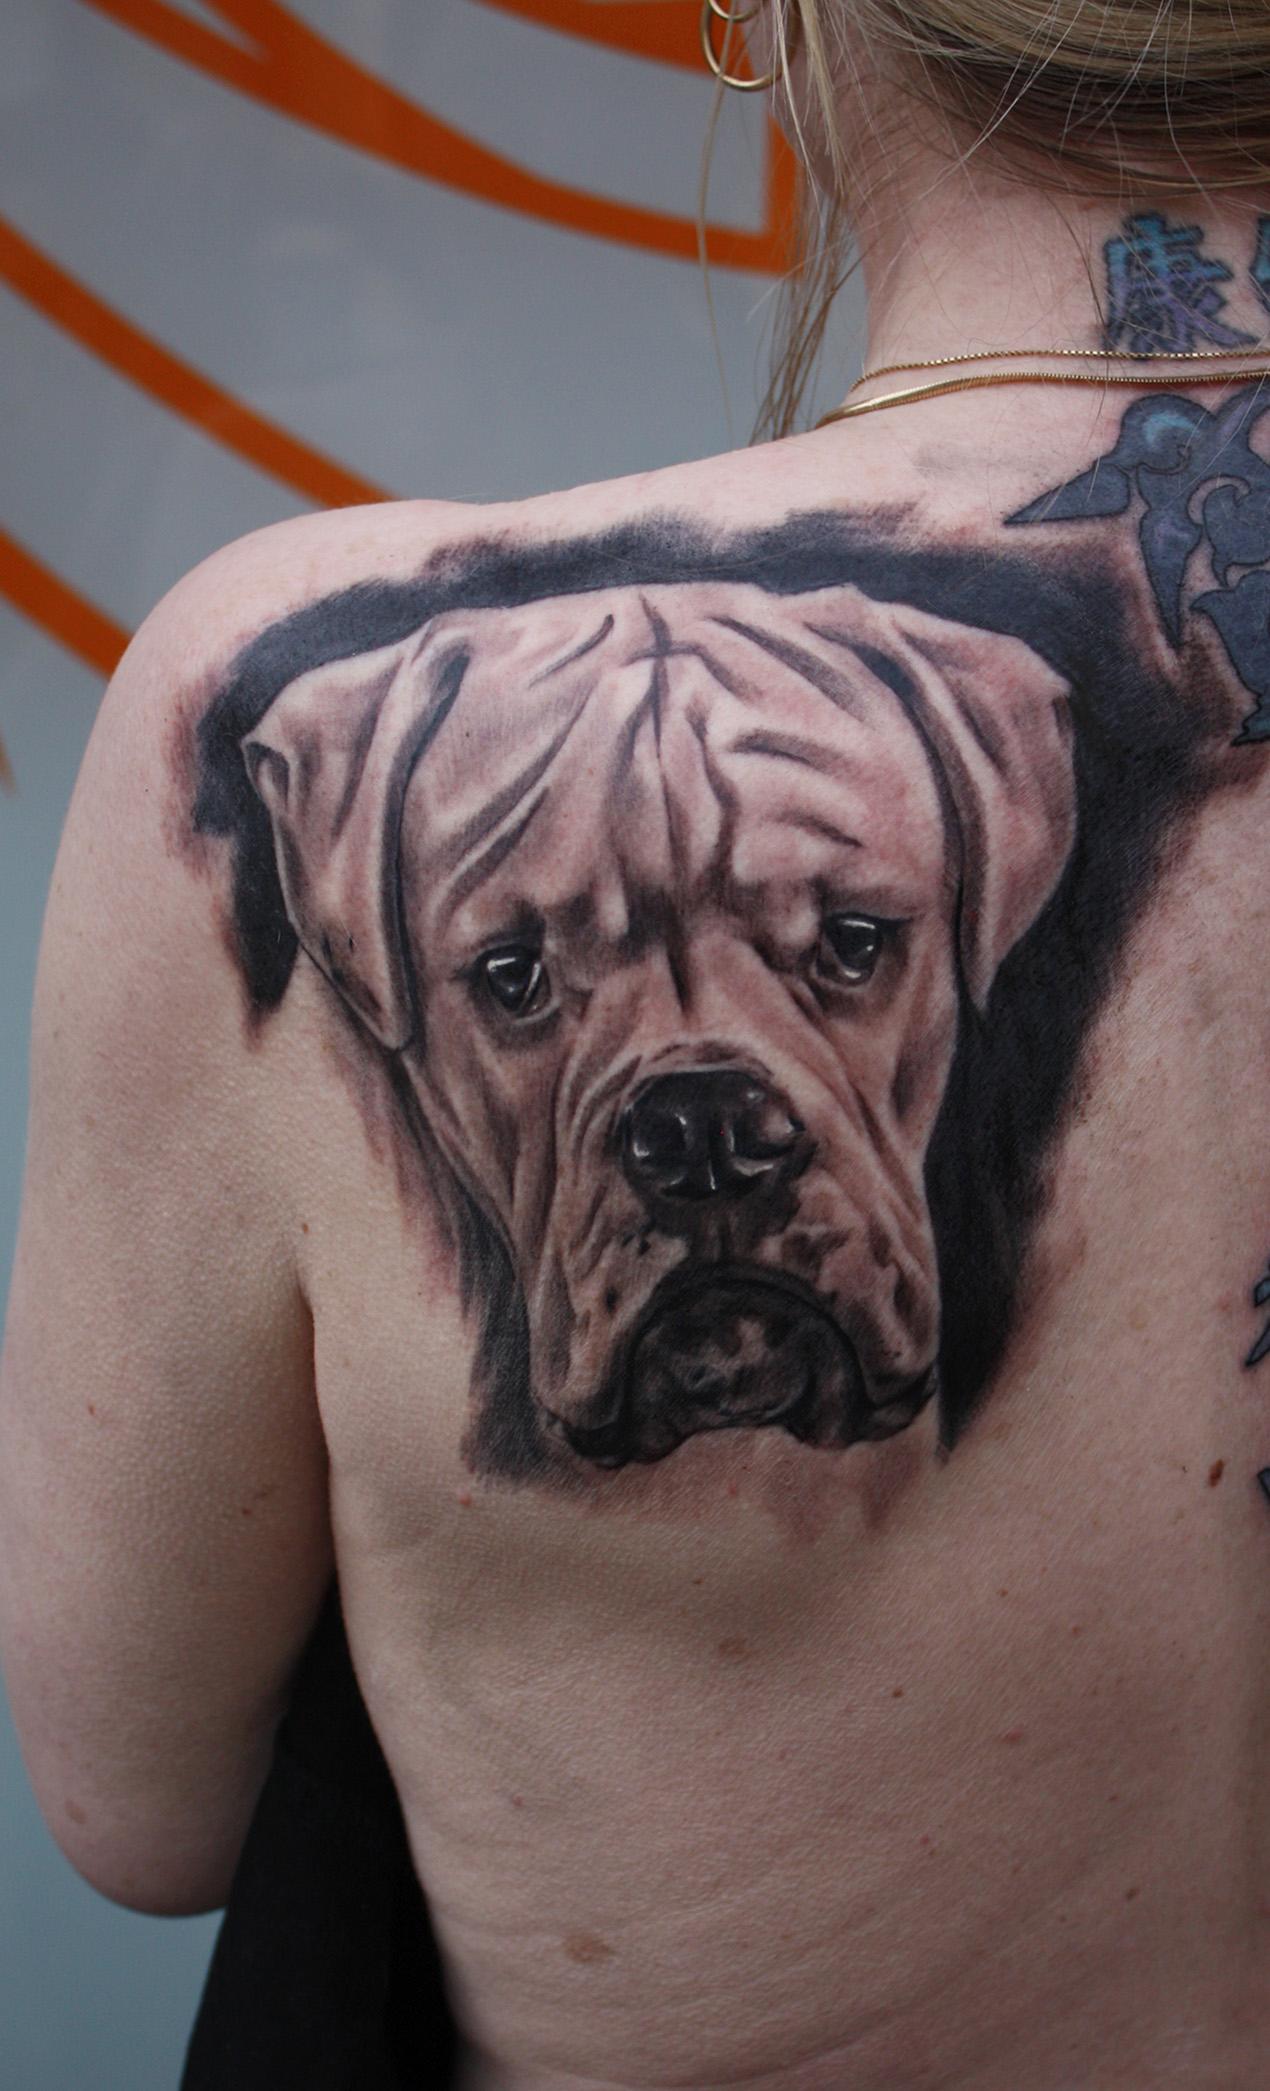 Dog Tattoos Designs, Ideas and Meaning | Tattoos For You